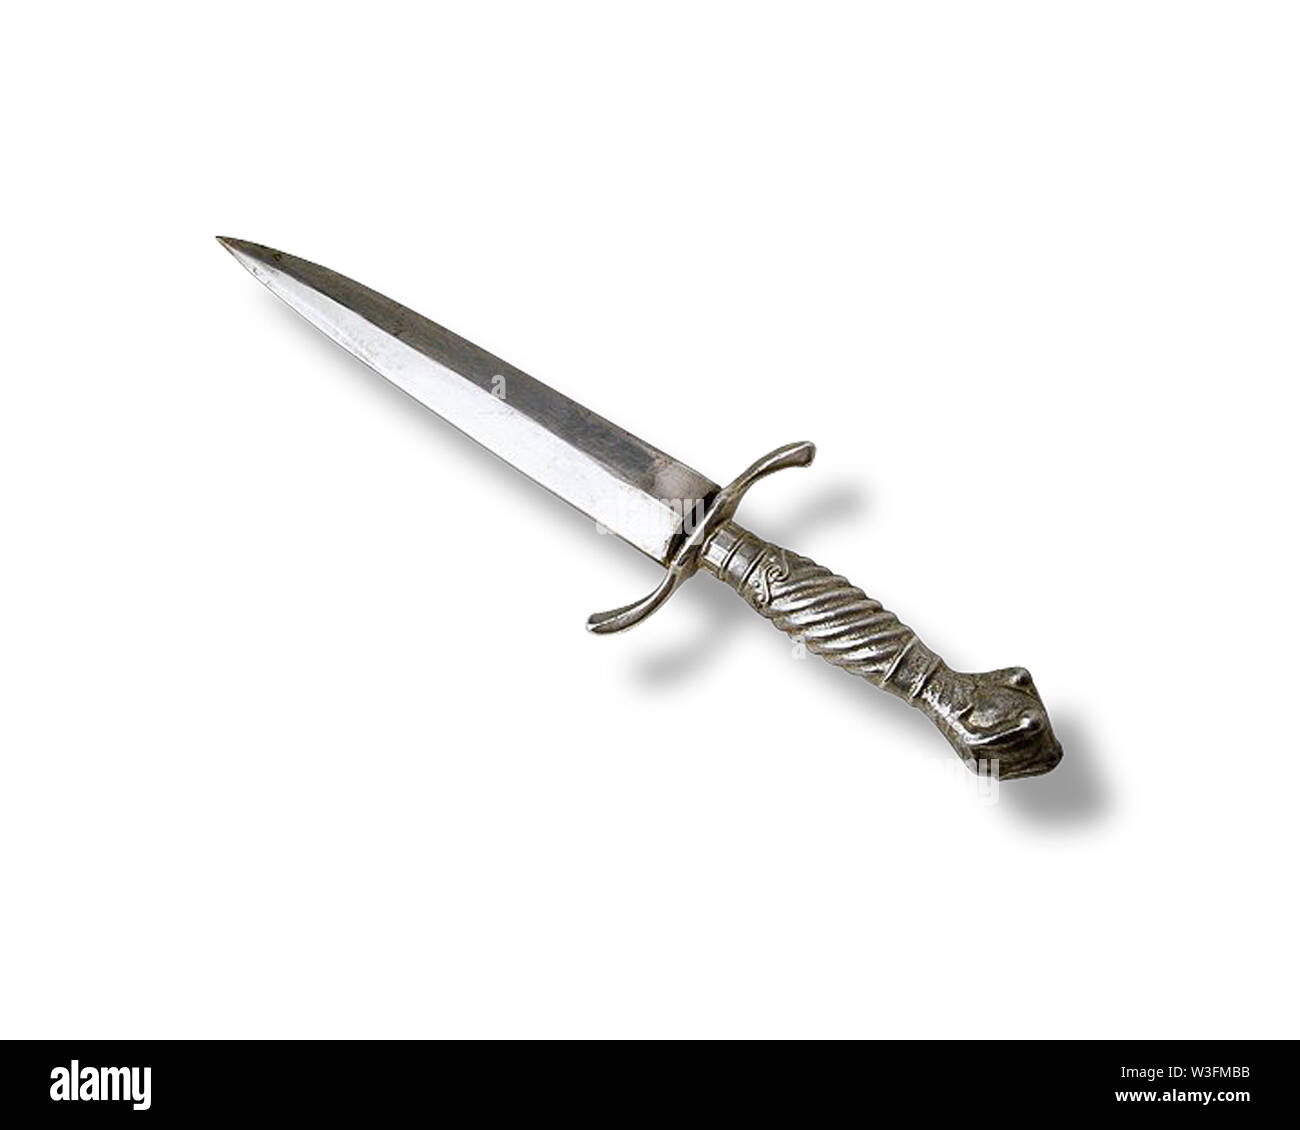 Hunting dagger knife with decorative handle on a white background. Vintage dagger. Stock Photo